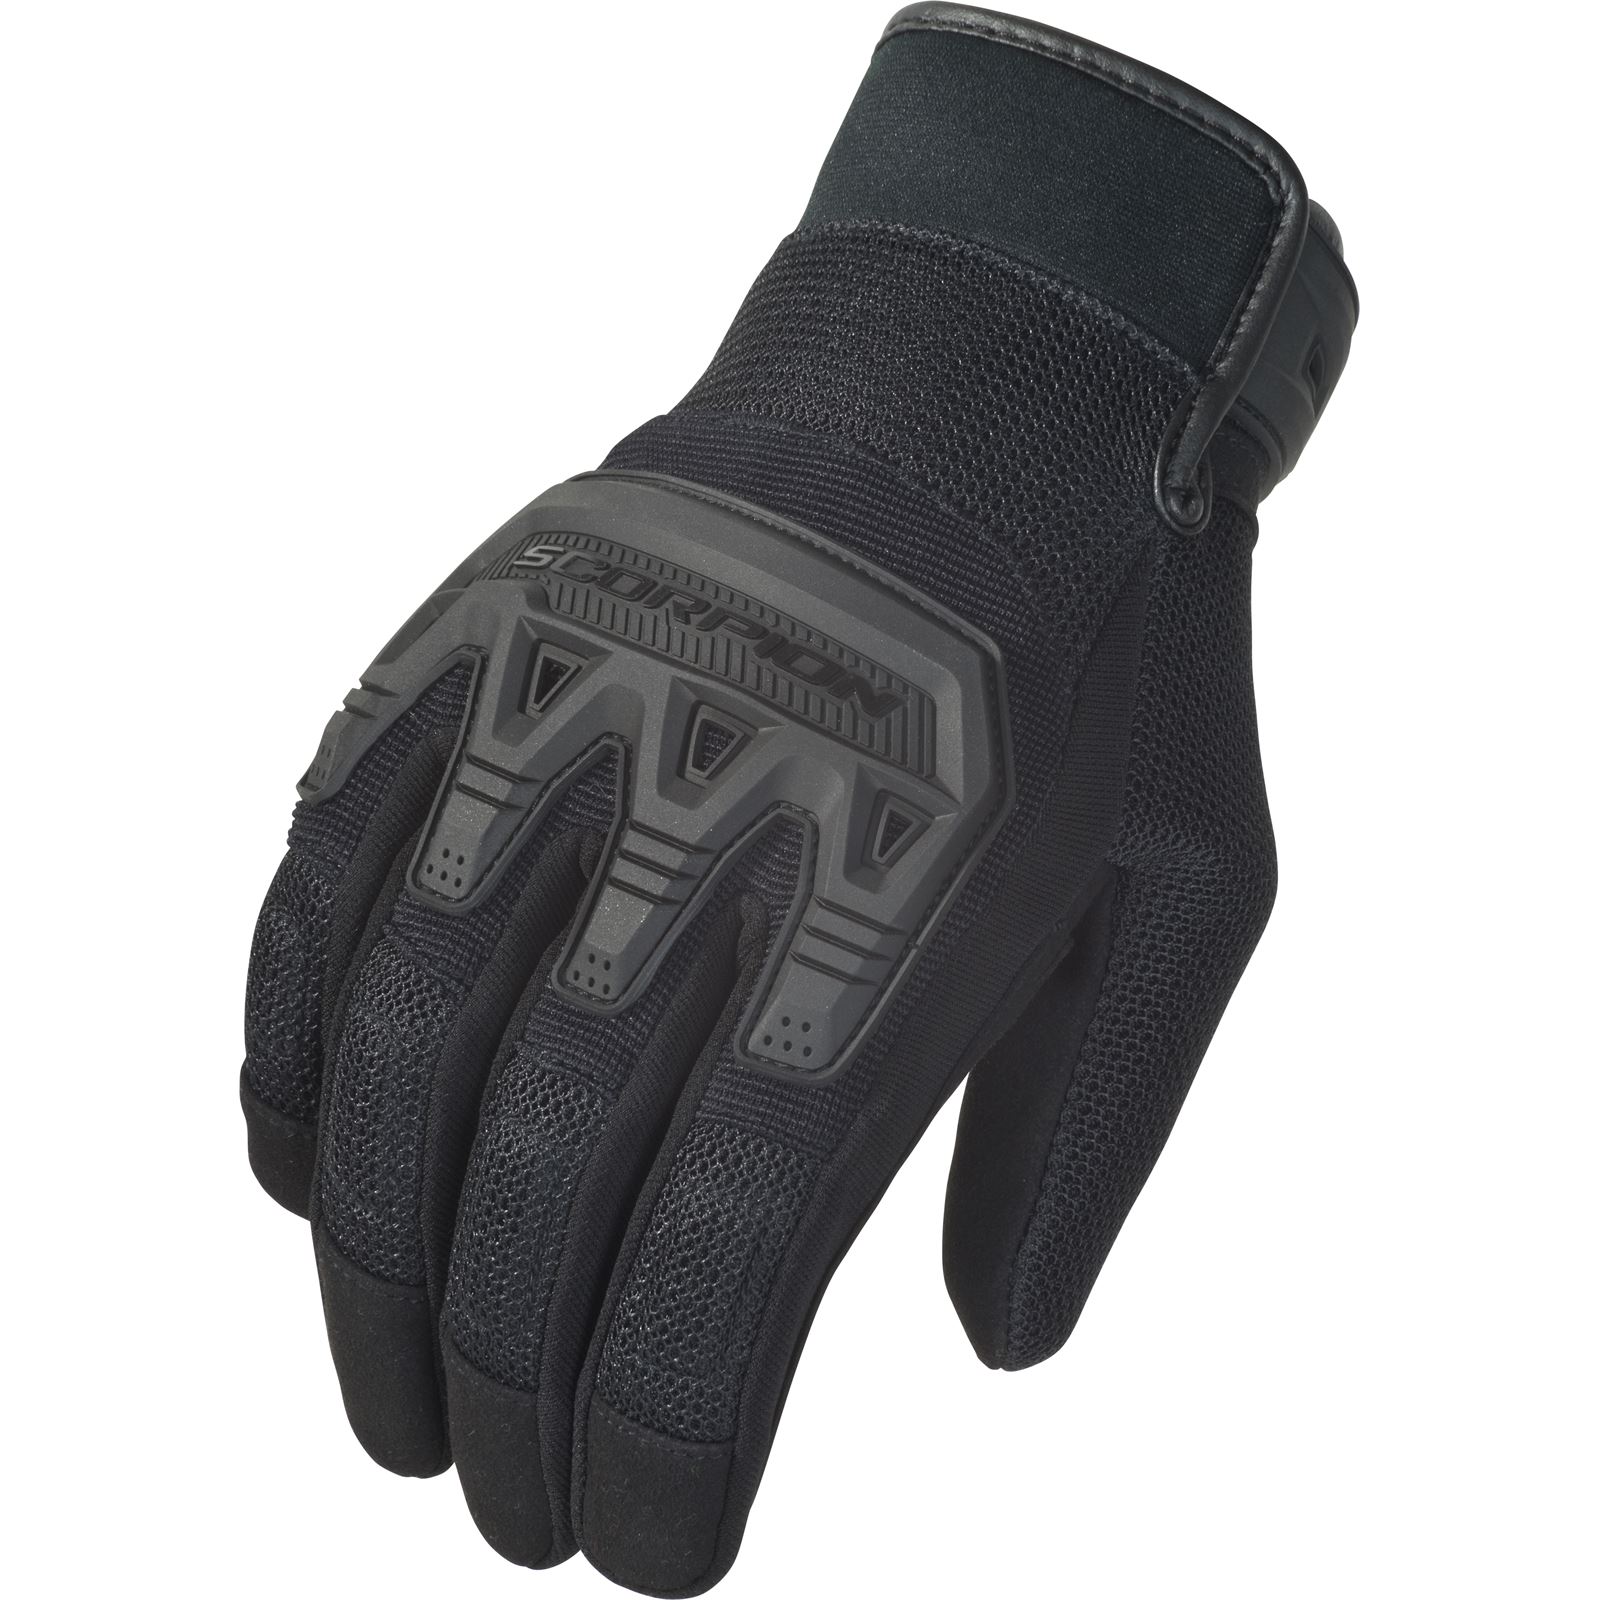 Scorpion Covert Tactical Gloves